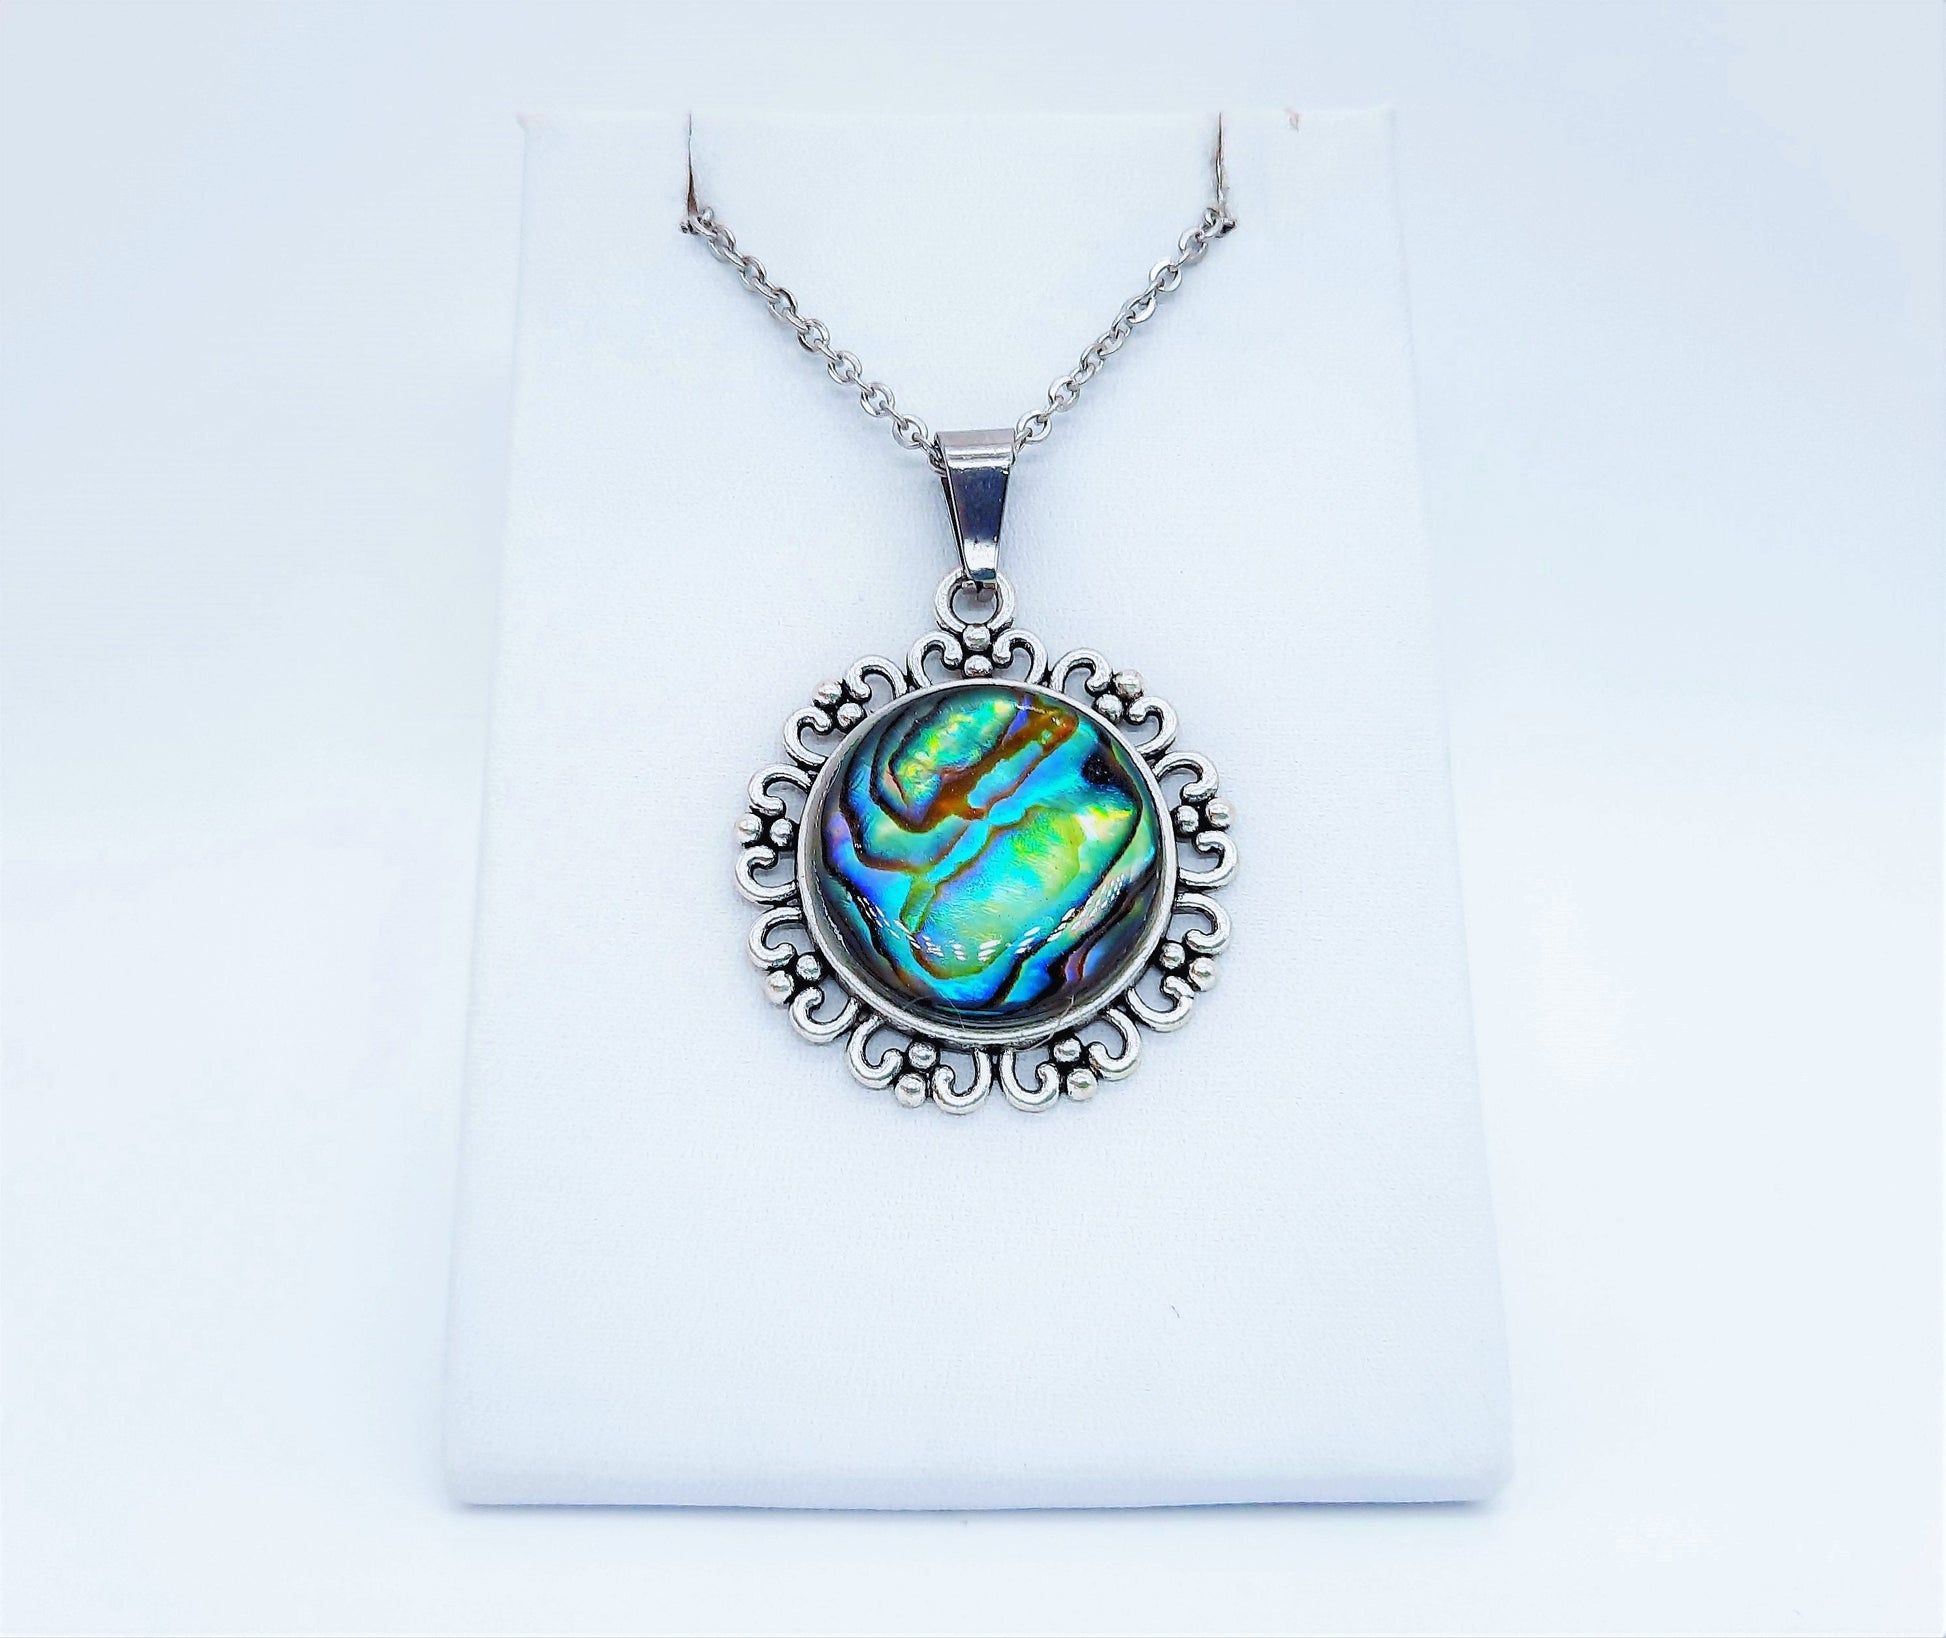 Abalone / Paua Seashell Tibetan Style Pendant Necklace - Stainless Steel - Hypoallergenic - Covered with Holographic Powder Infused Resin